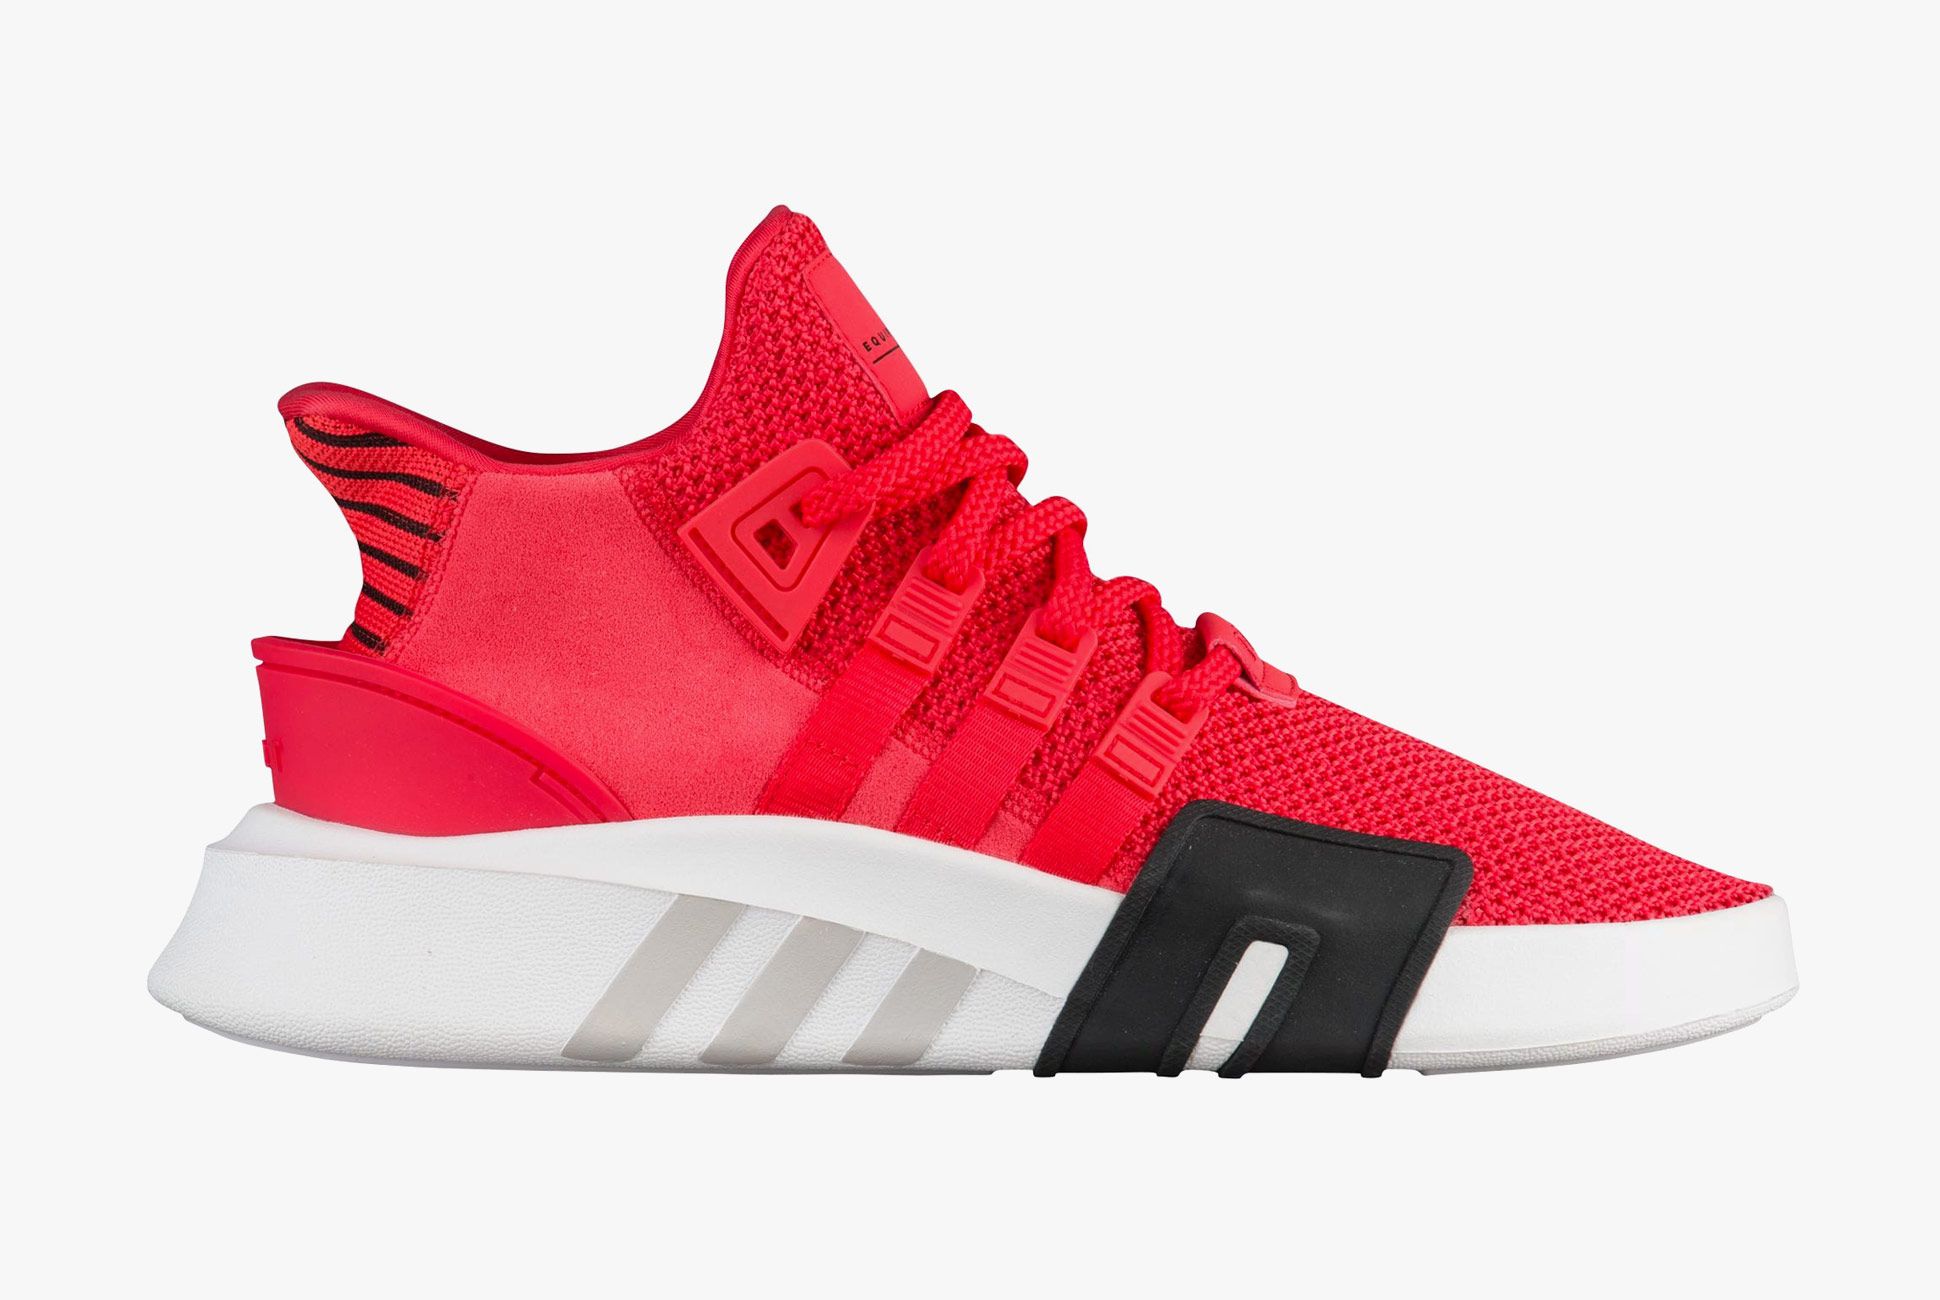 Save 60% Off Some of the Top Sneakers From Adidas